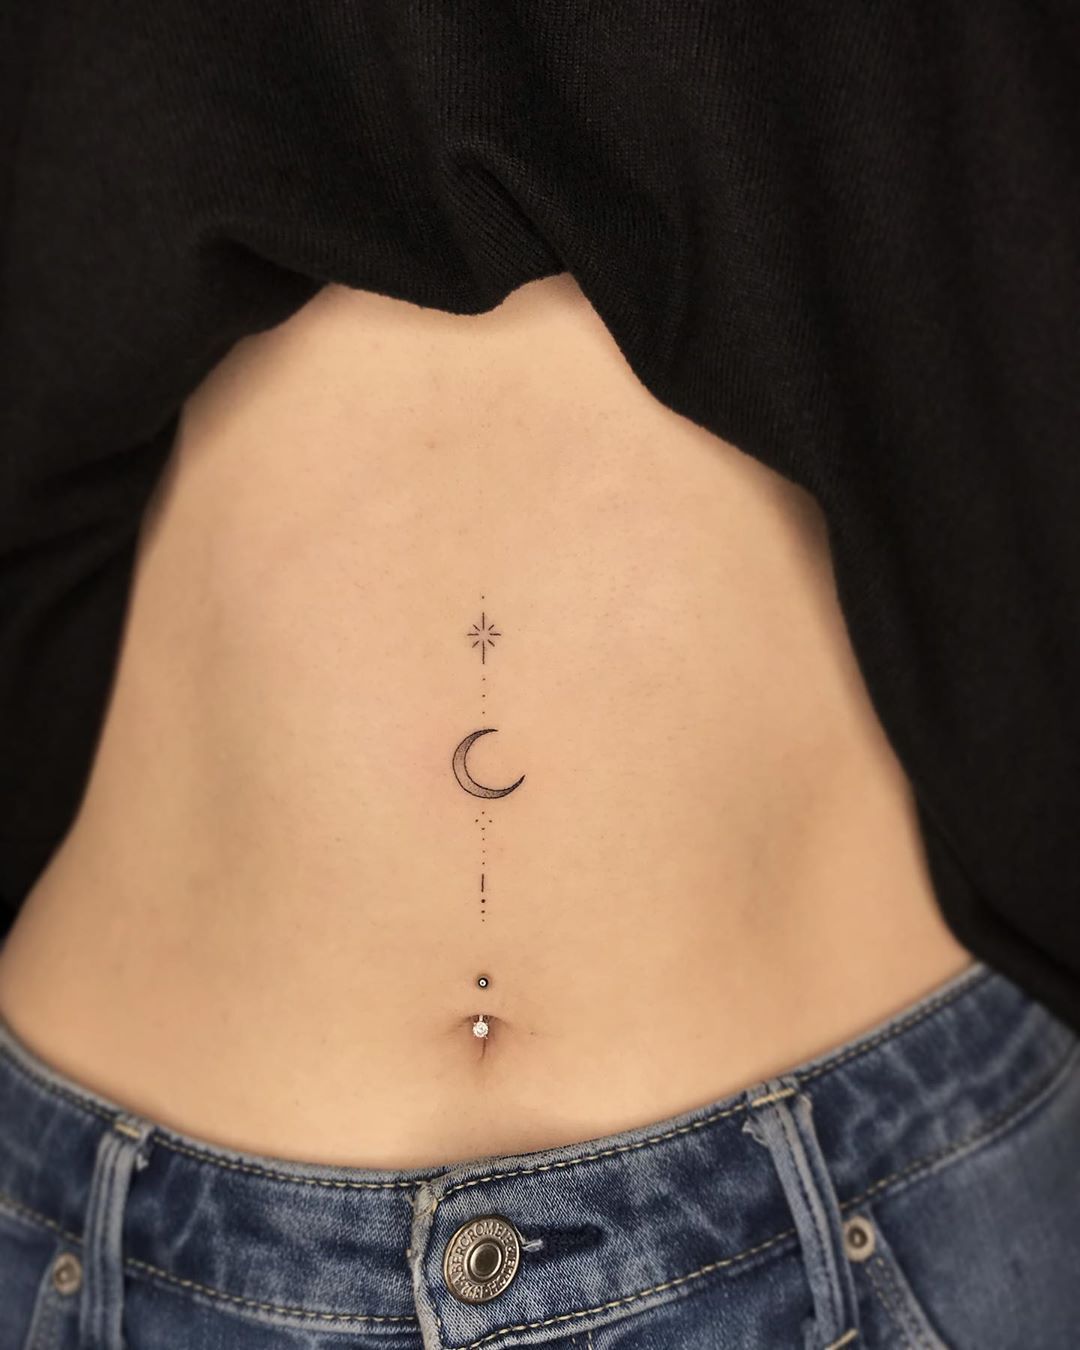 11 Stomach Tattoo Men Ideas That Will Blow Your Mind  alexie